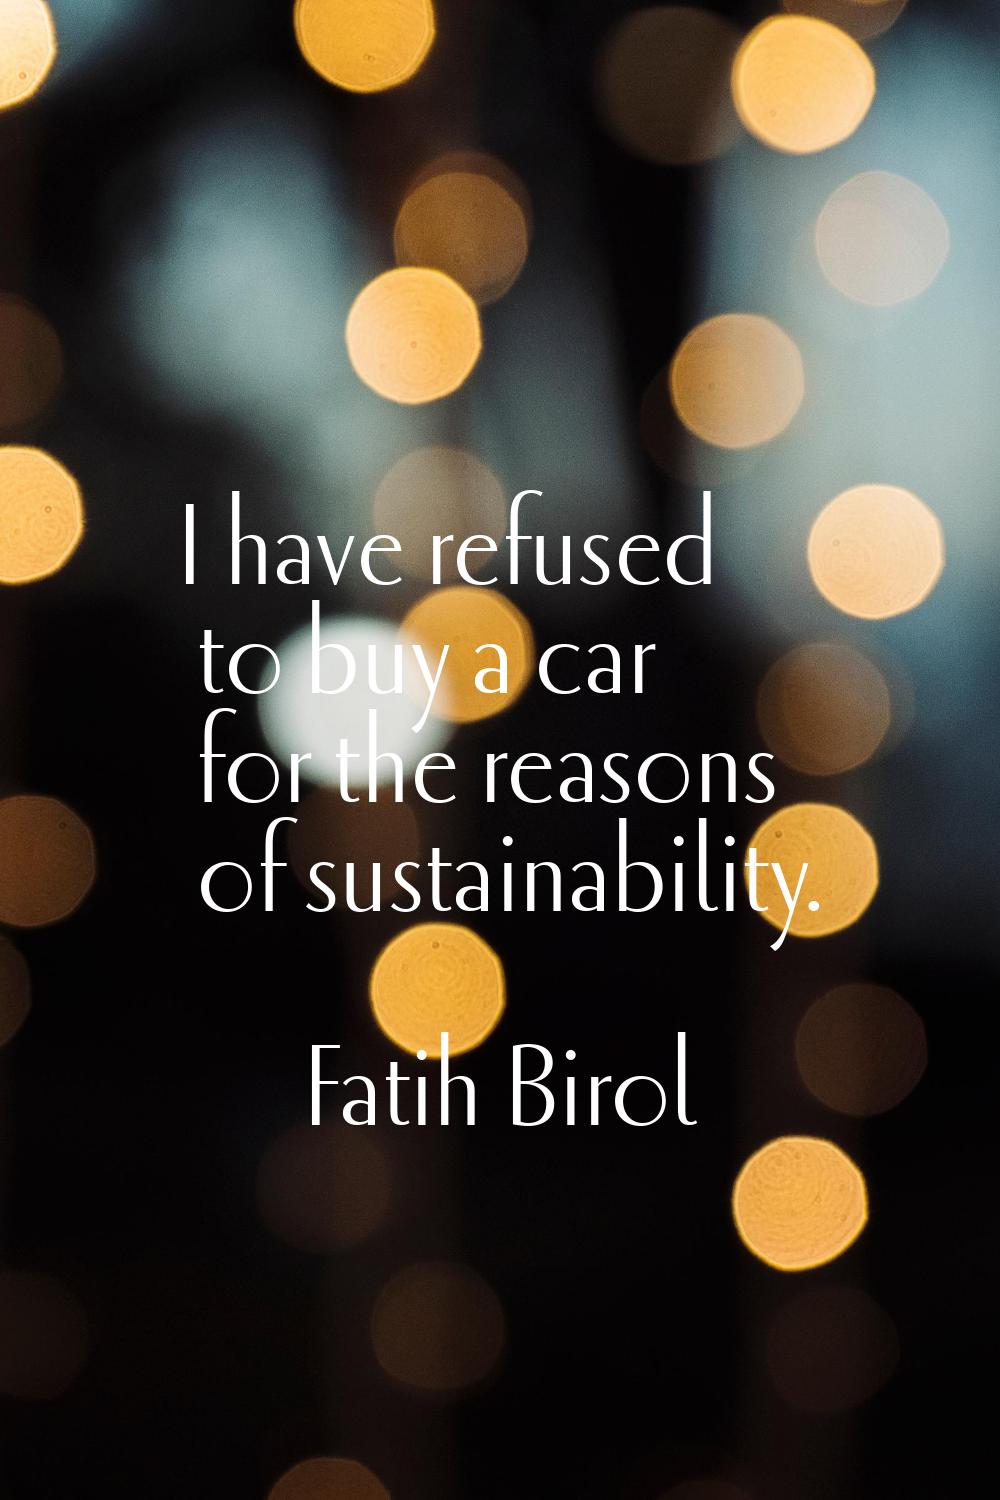 I have refused to buy a car for the reasons of sustainability.